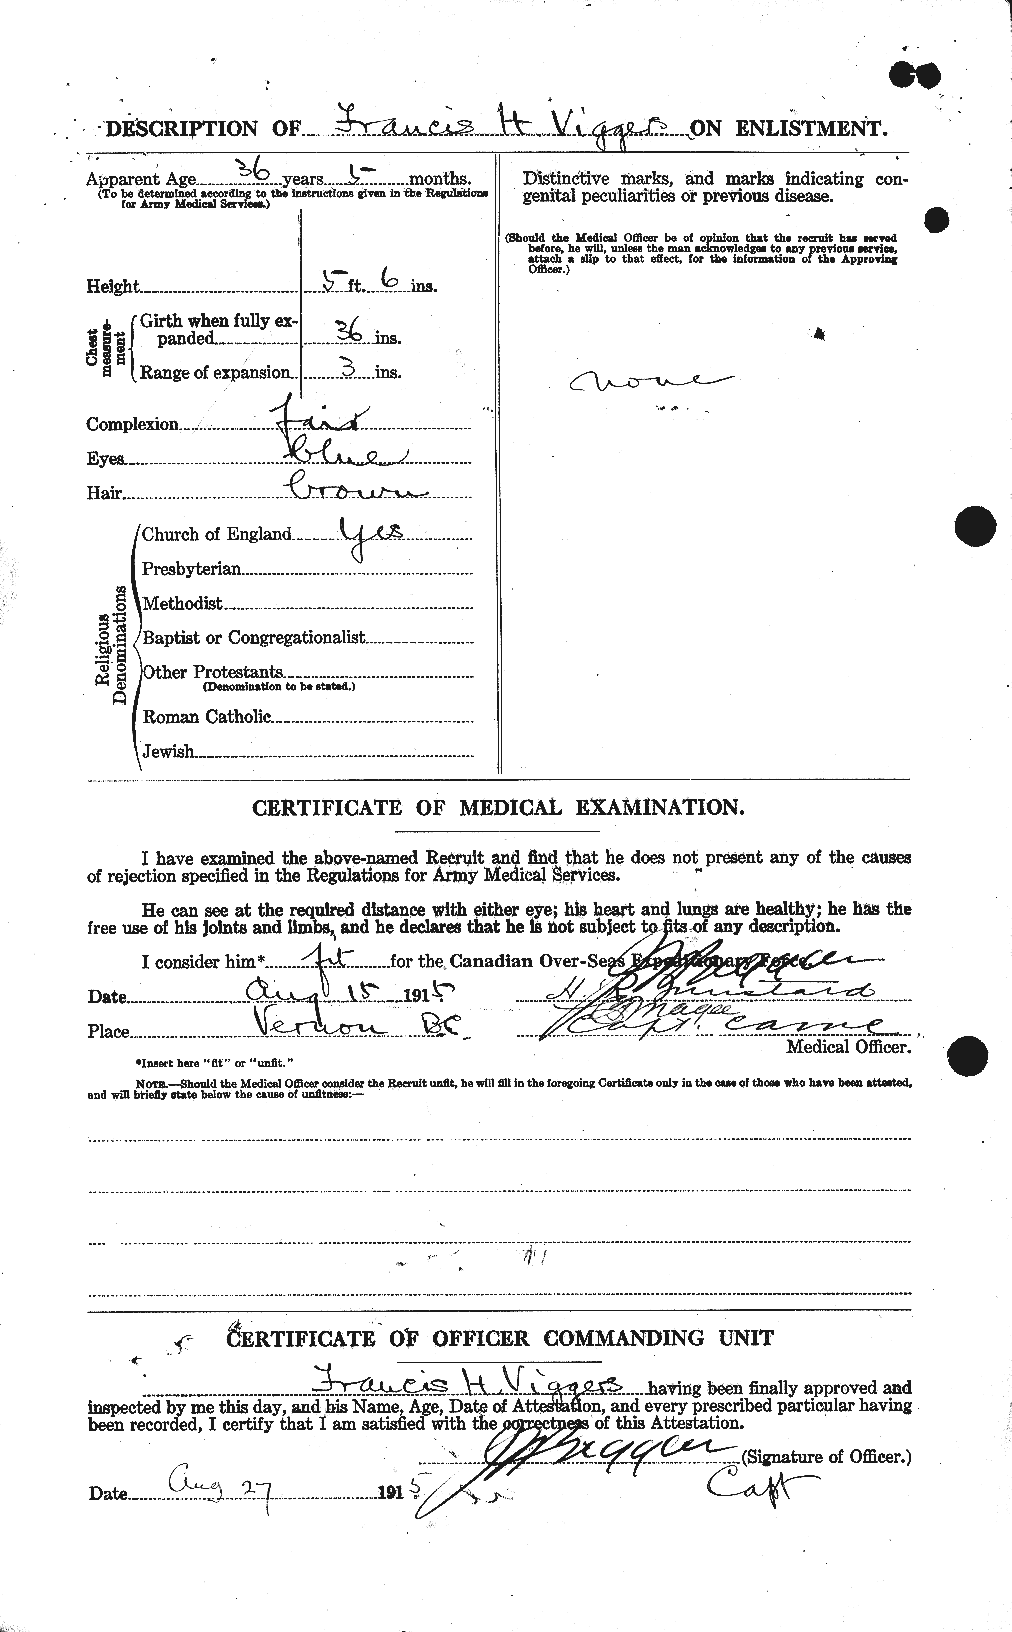 Personnel Records of the First World War - CEF 653683b